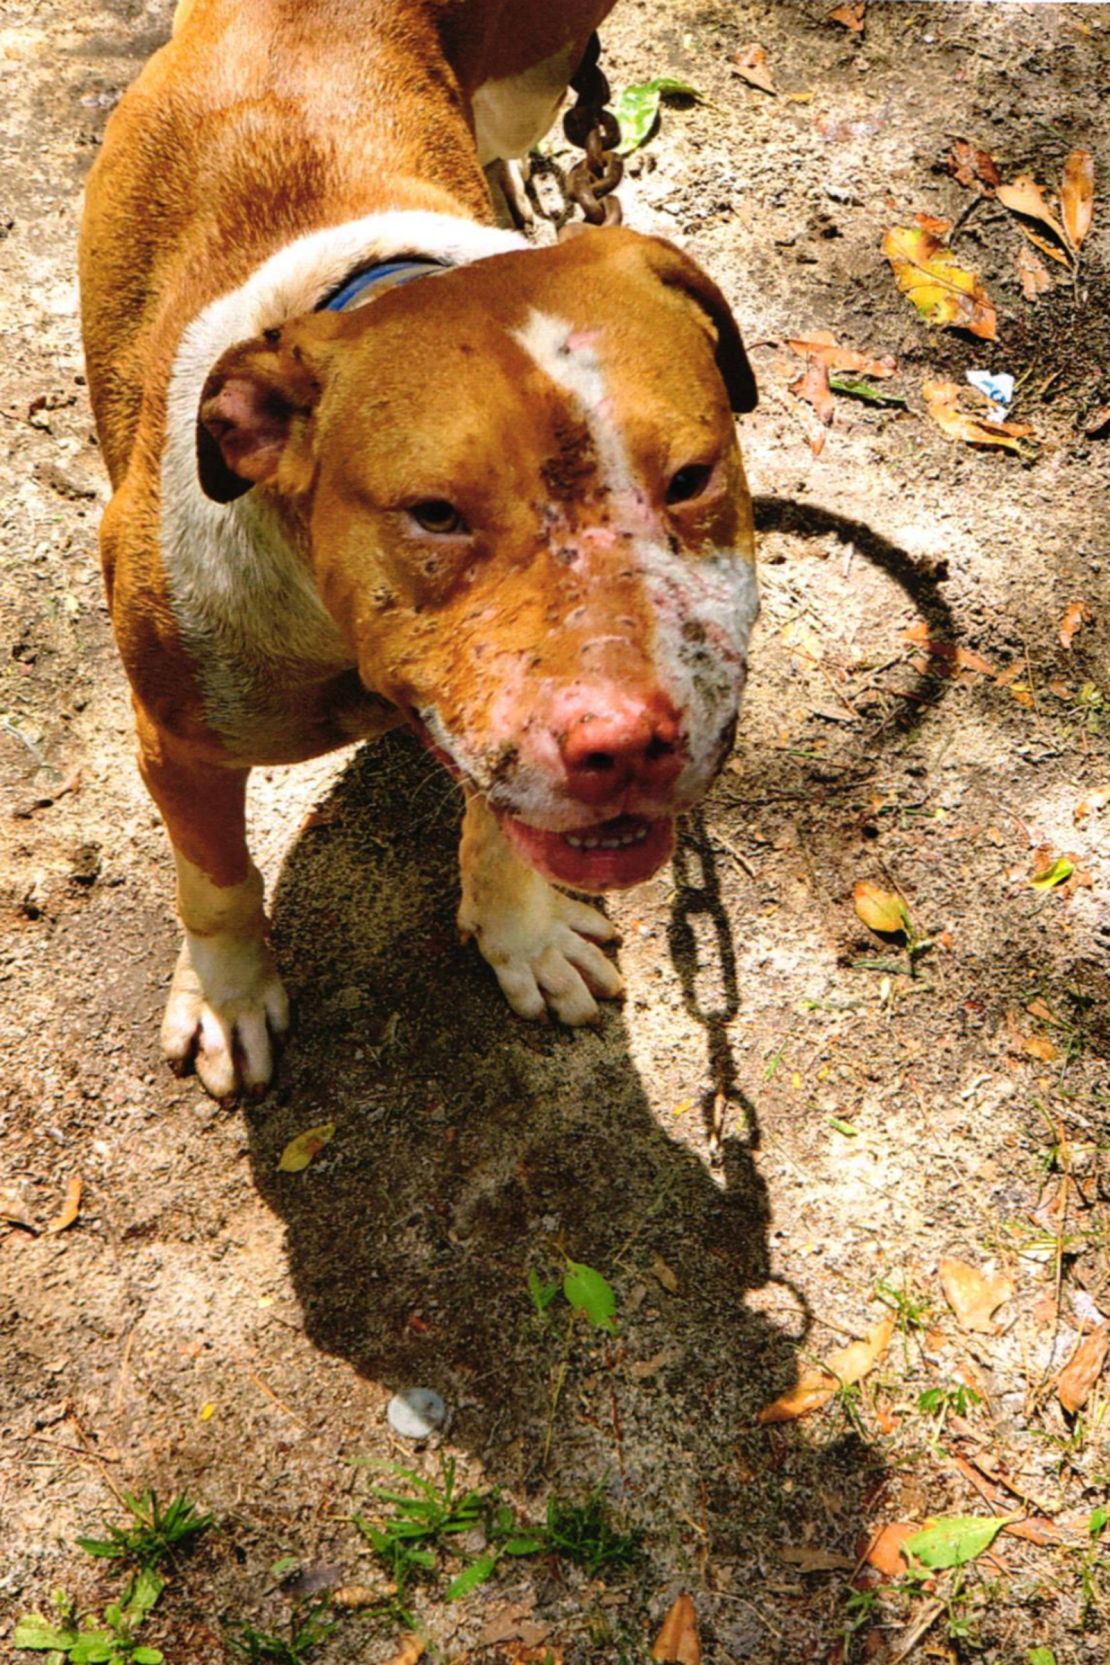 A dog with severe scarring was one of 22 pit bulls seized from a South Carolina property in 2022.